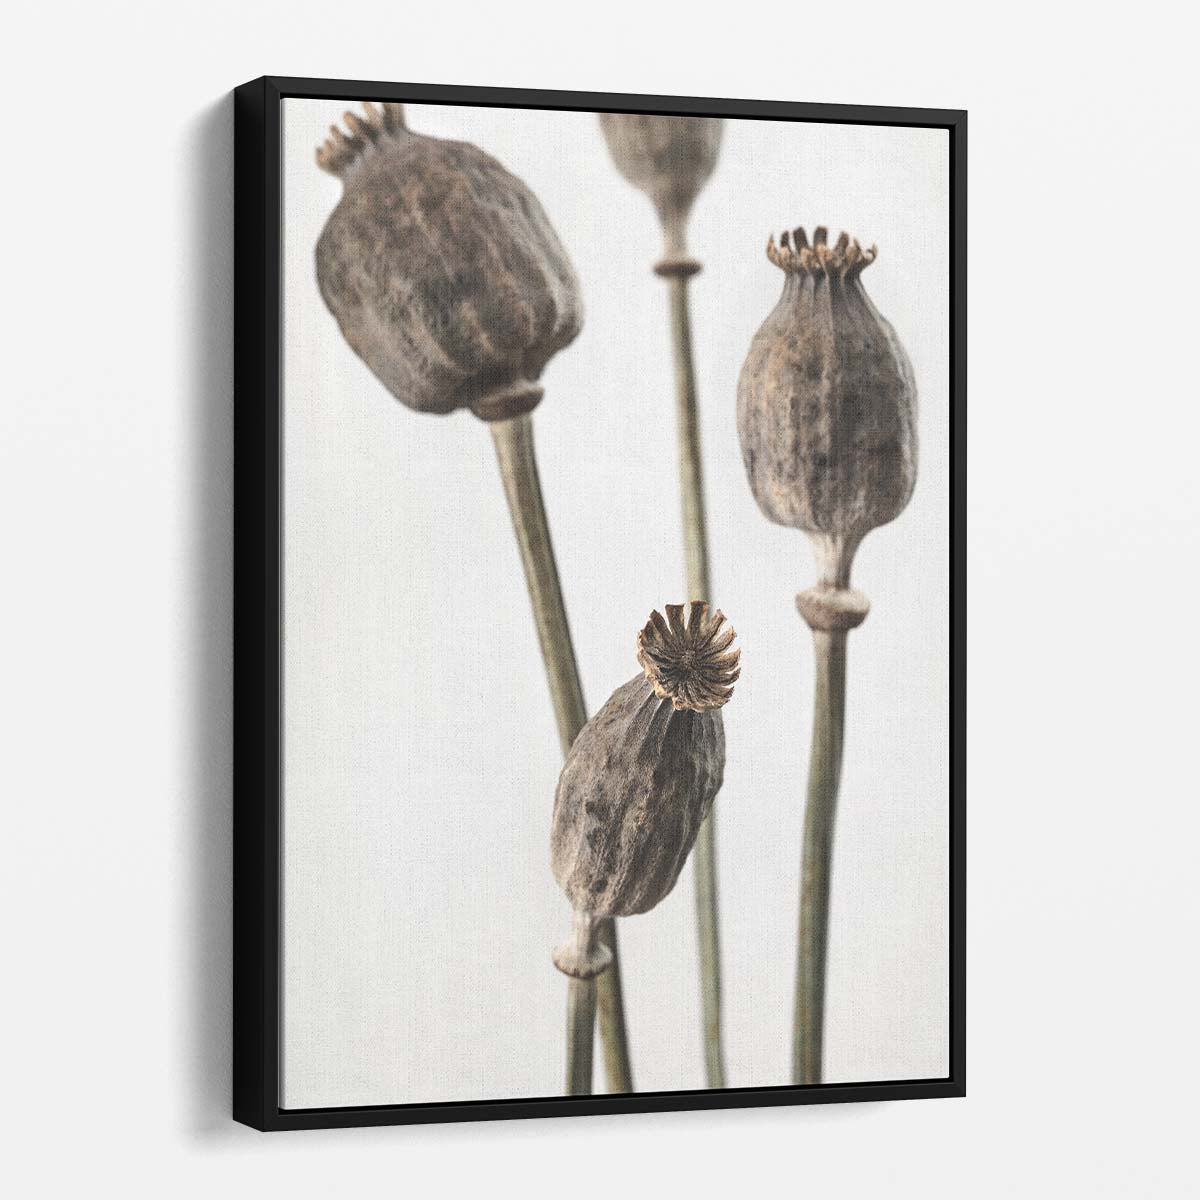 Botanical Still Life Photography of Dried Poppy Flowers by Luxuriance Designs, made in USA